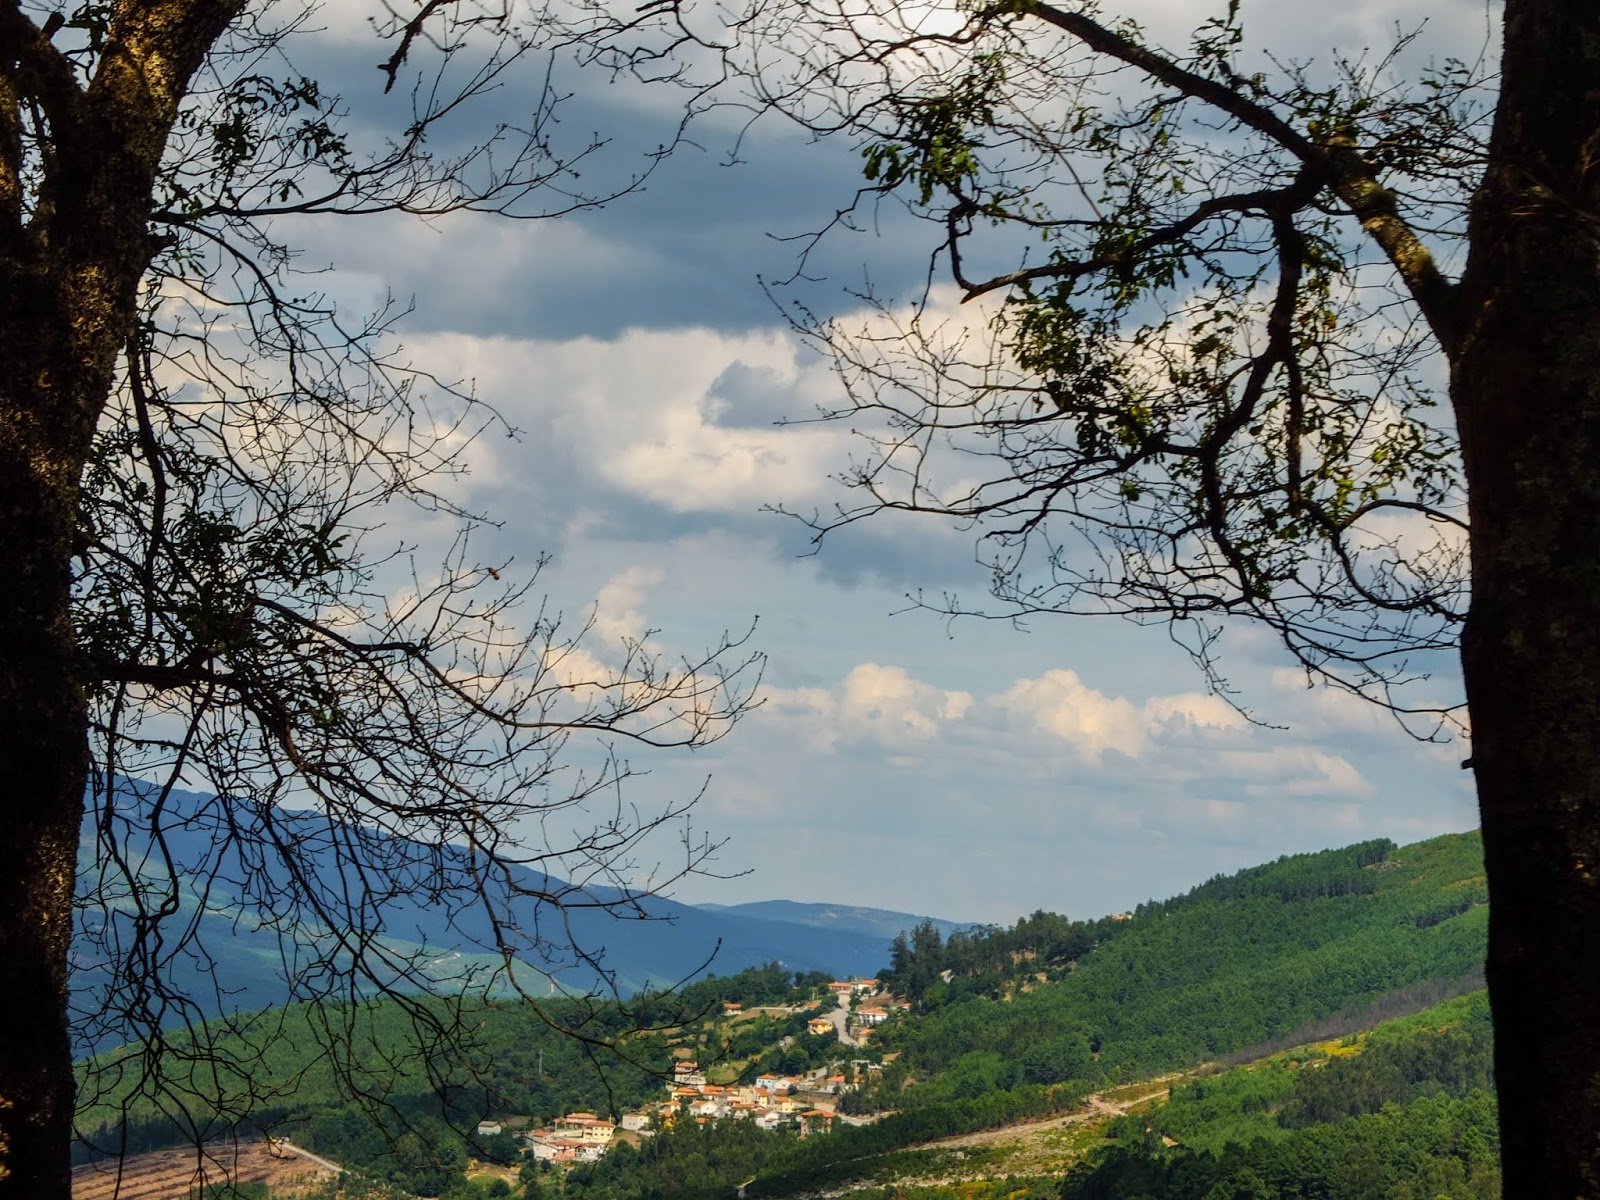 A mountain landscape pictured between two trees in the North of Portugal.